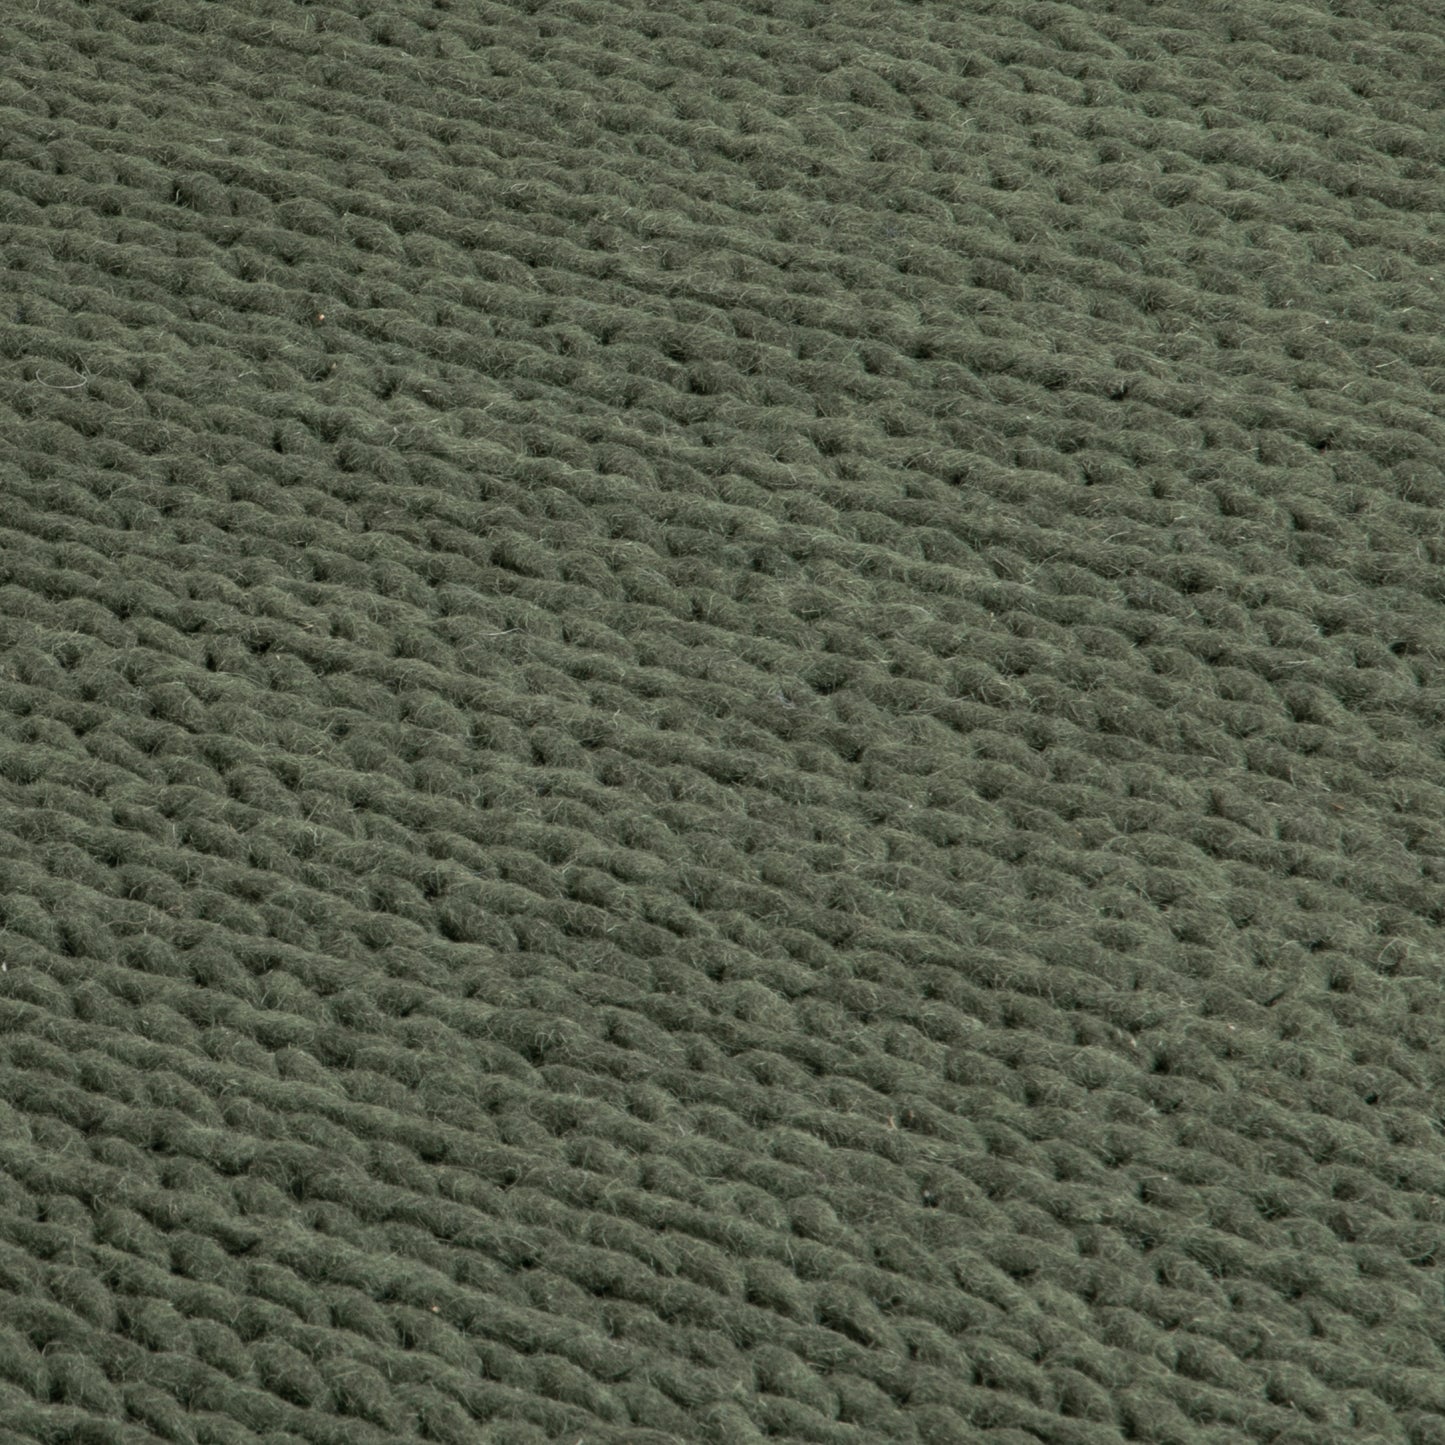 Green Knitted Large Wool Rug 160 x 230cm Rugs CasaFenix